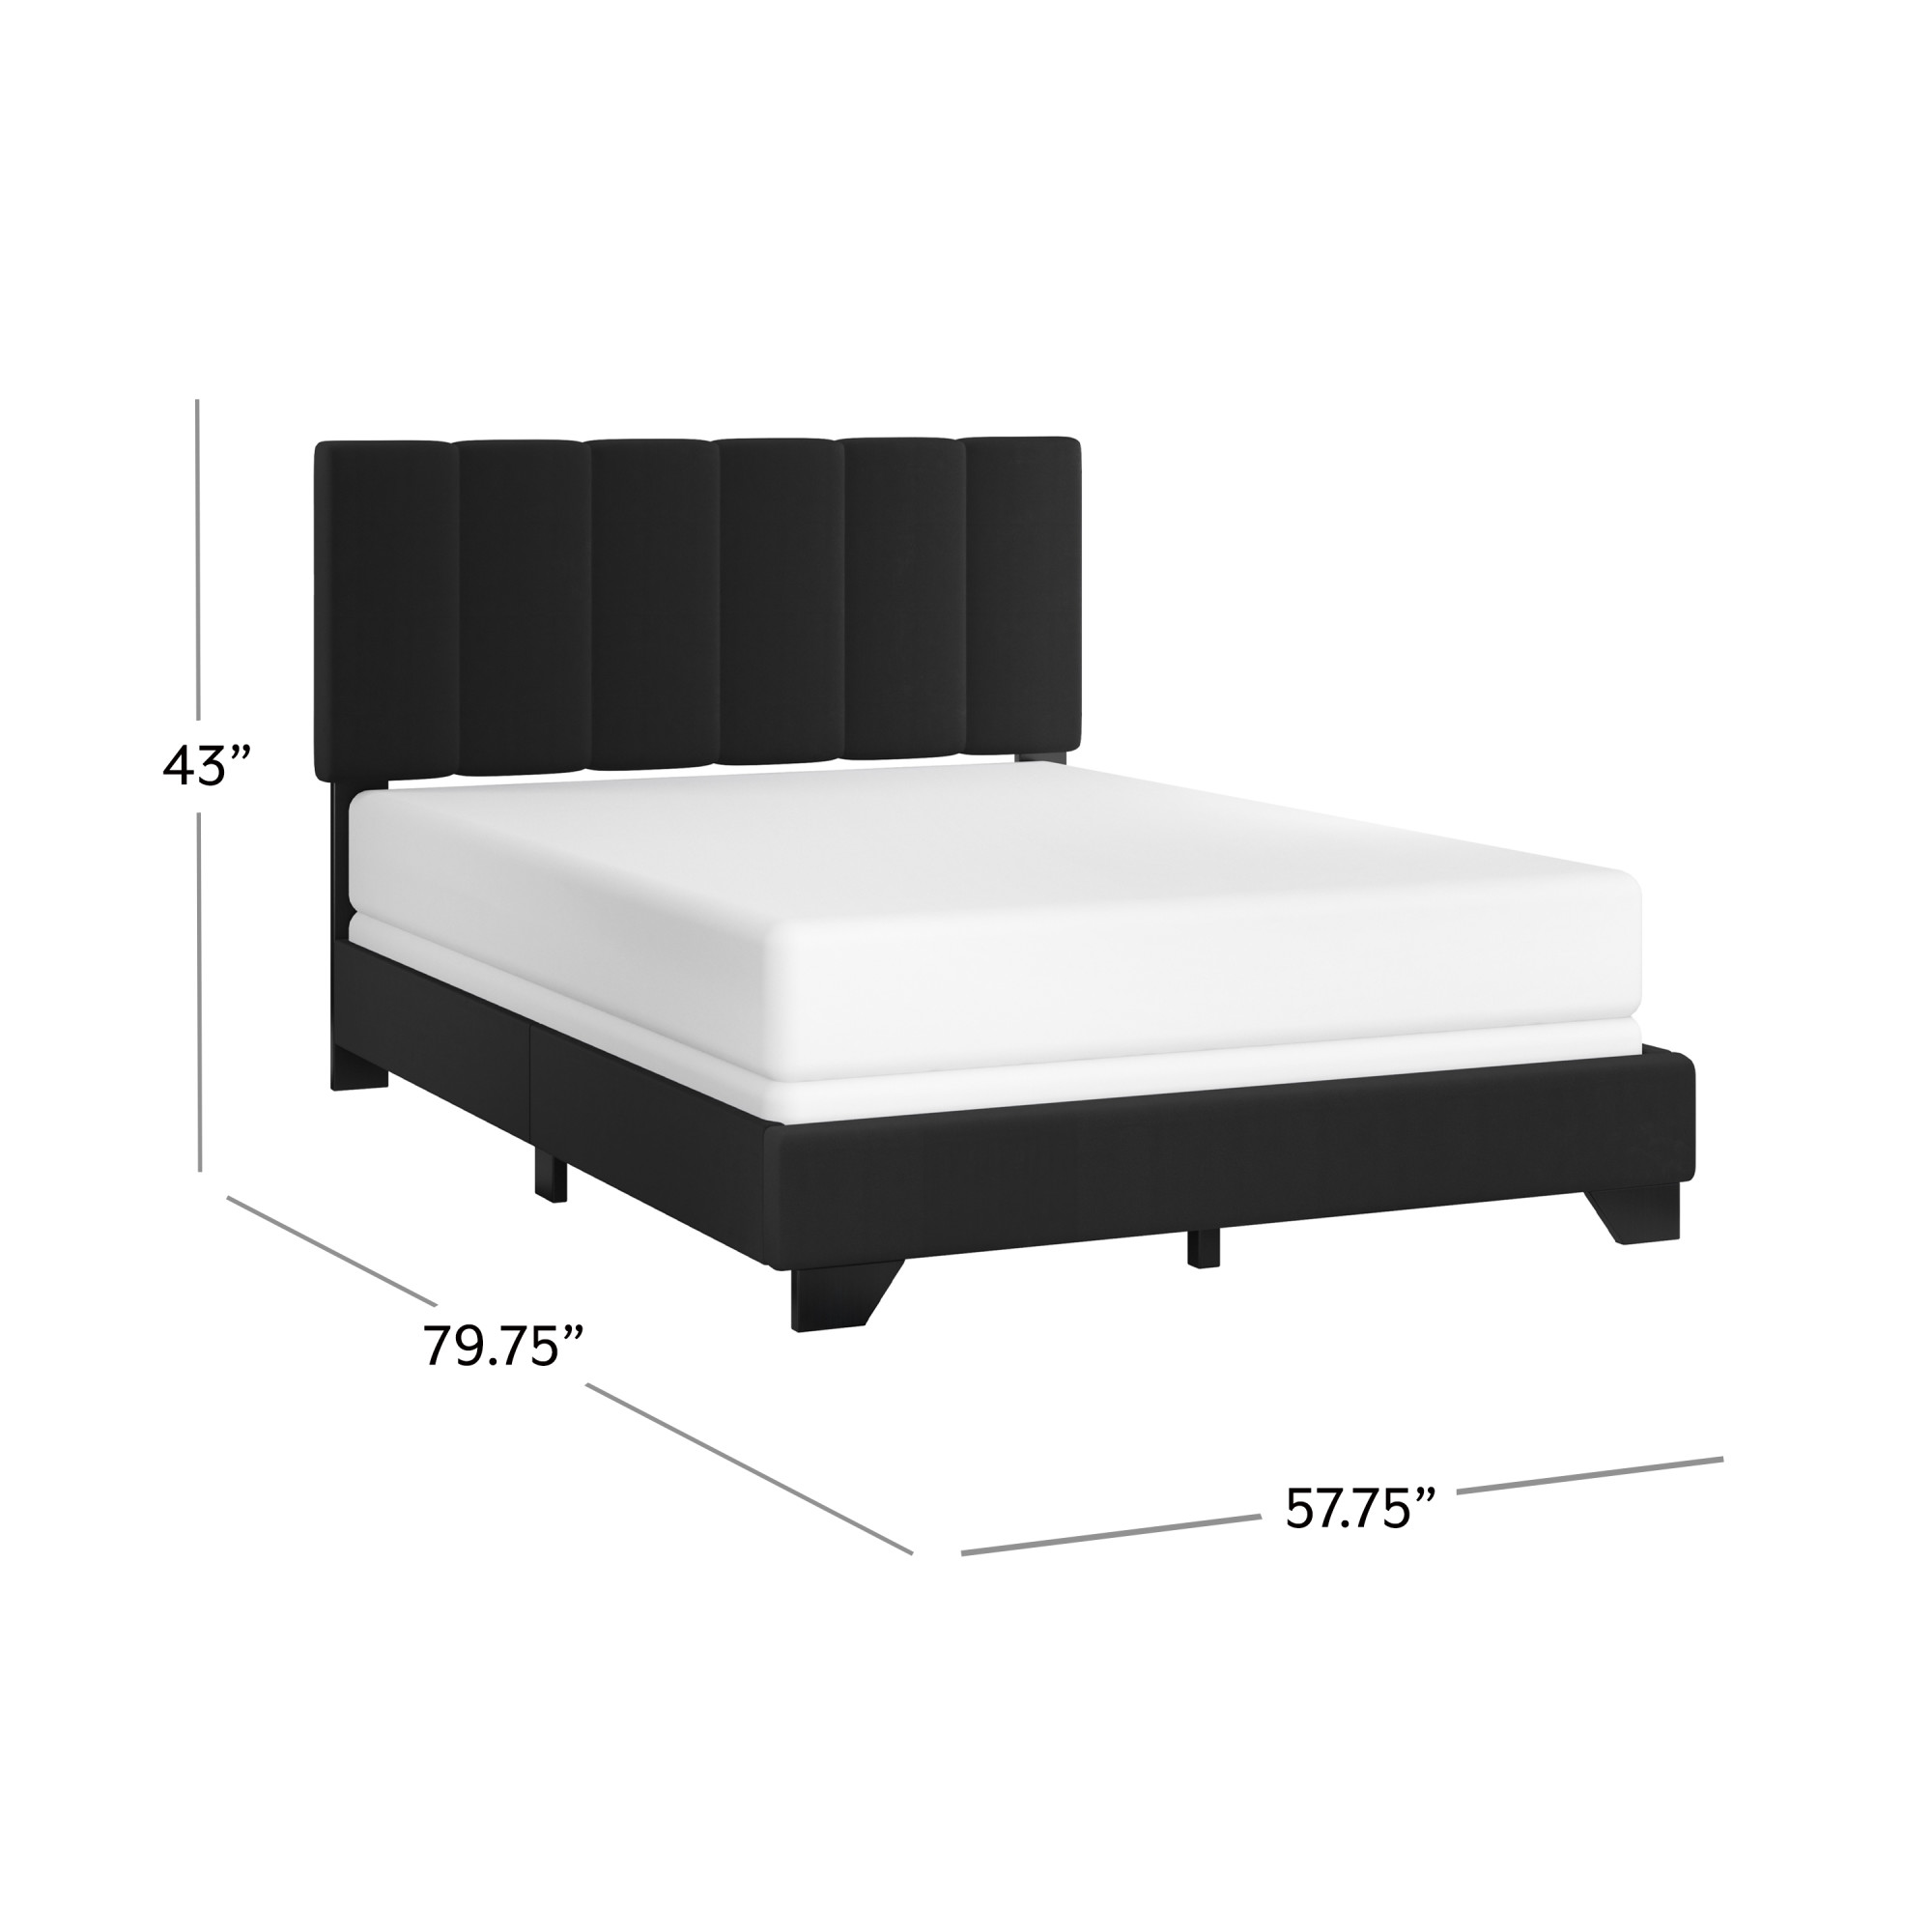 Reece Channel Stitched Upholstered Full Bed, Black, by Hillsdale Living Essentials - image 4 of 17